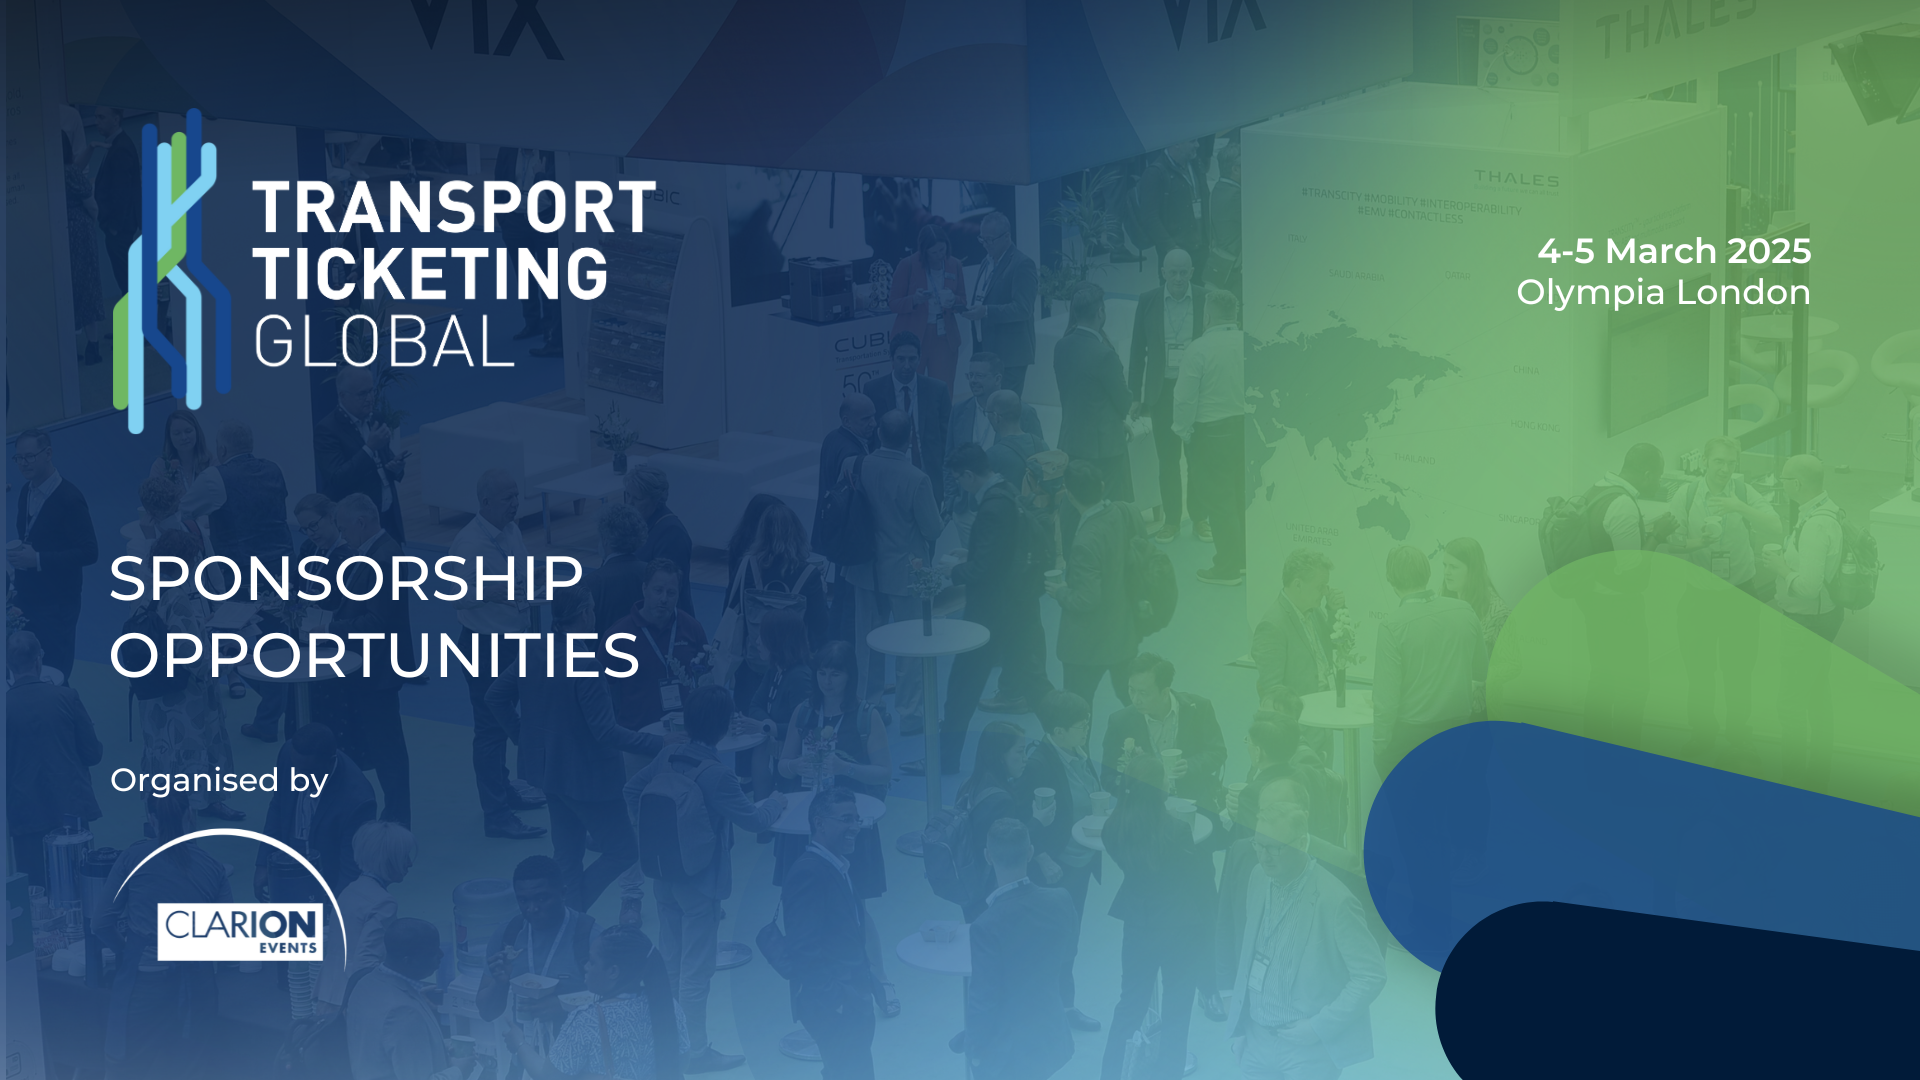 Sponsorship and exhibition brochure Transport Ticketing Global